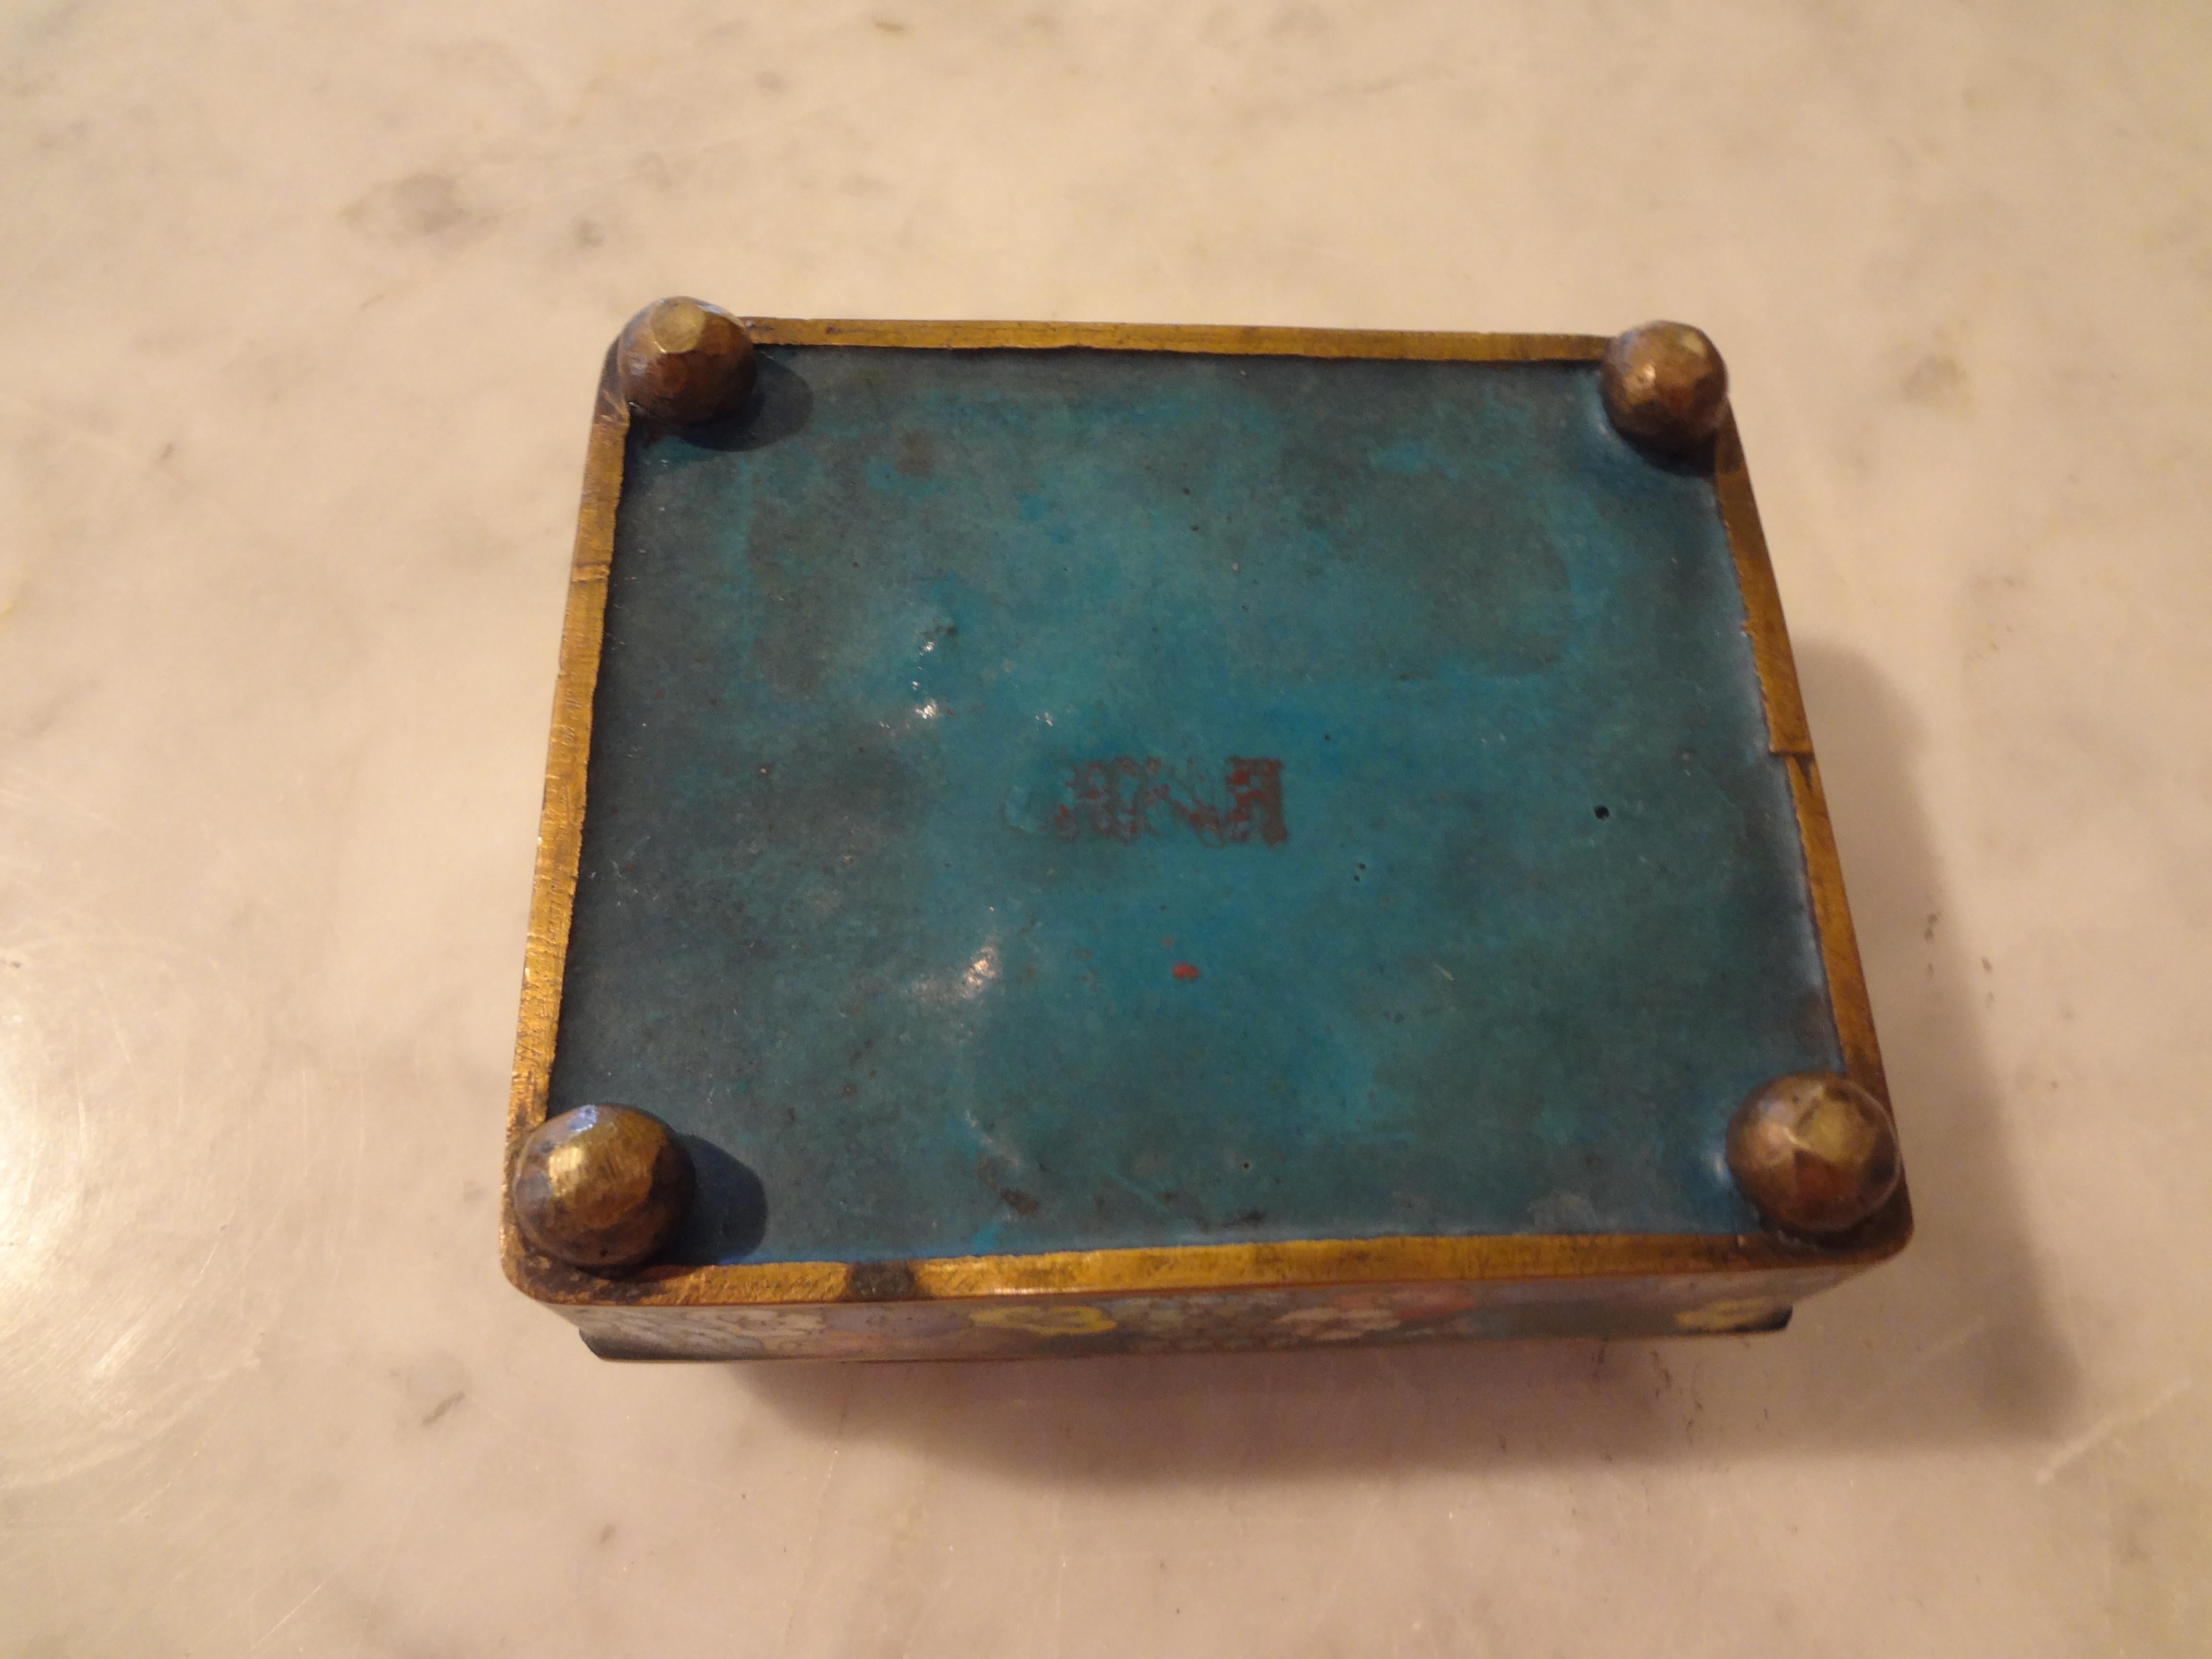 Chinese Export Cloisonné Box Stamped China 1